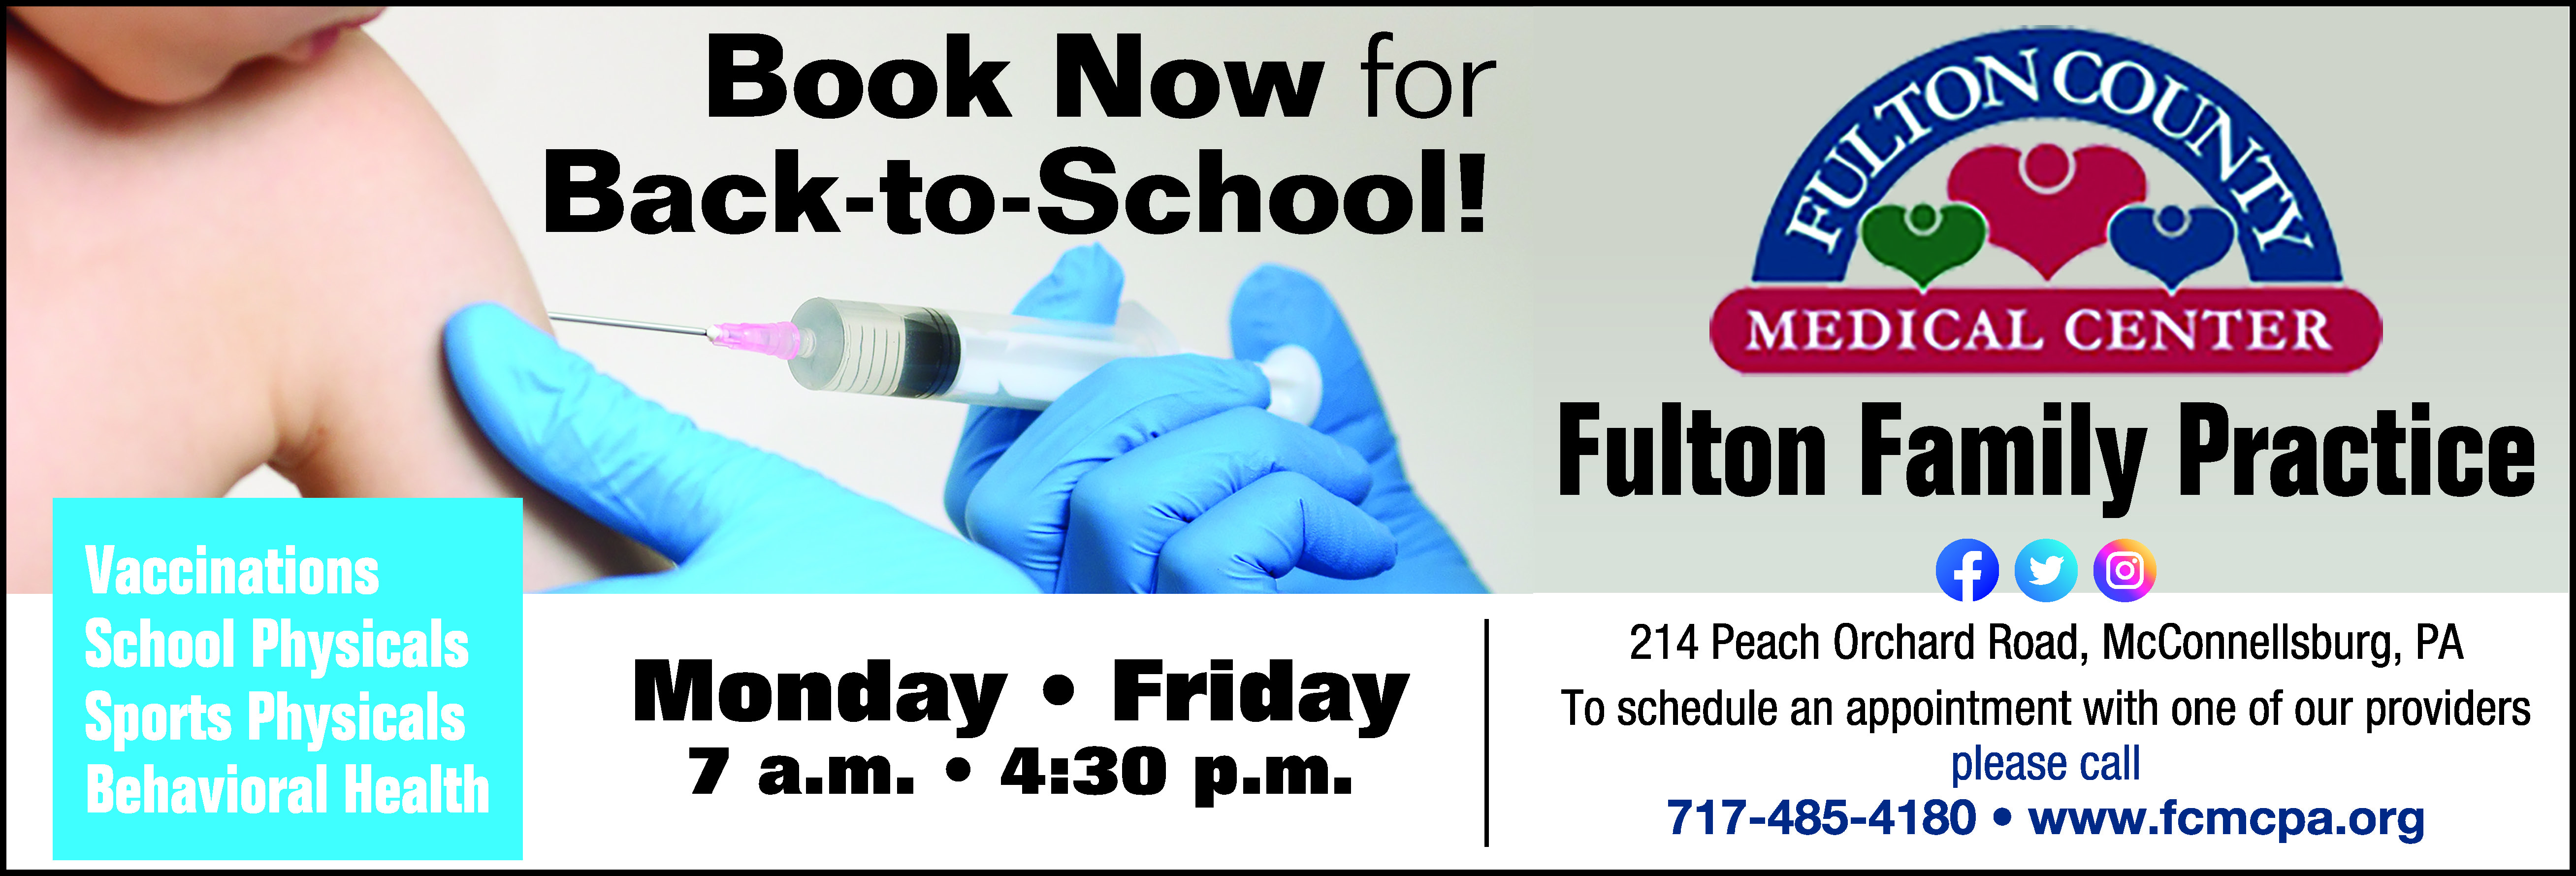 Book now for back to school. Monday - Friday 7:00 a.m. to 4:30 p.m. Call to schedule an appointment with one of our providers 717-485-4180.